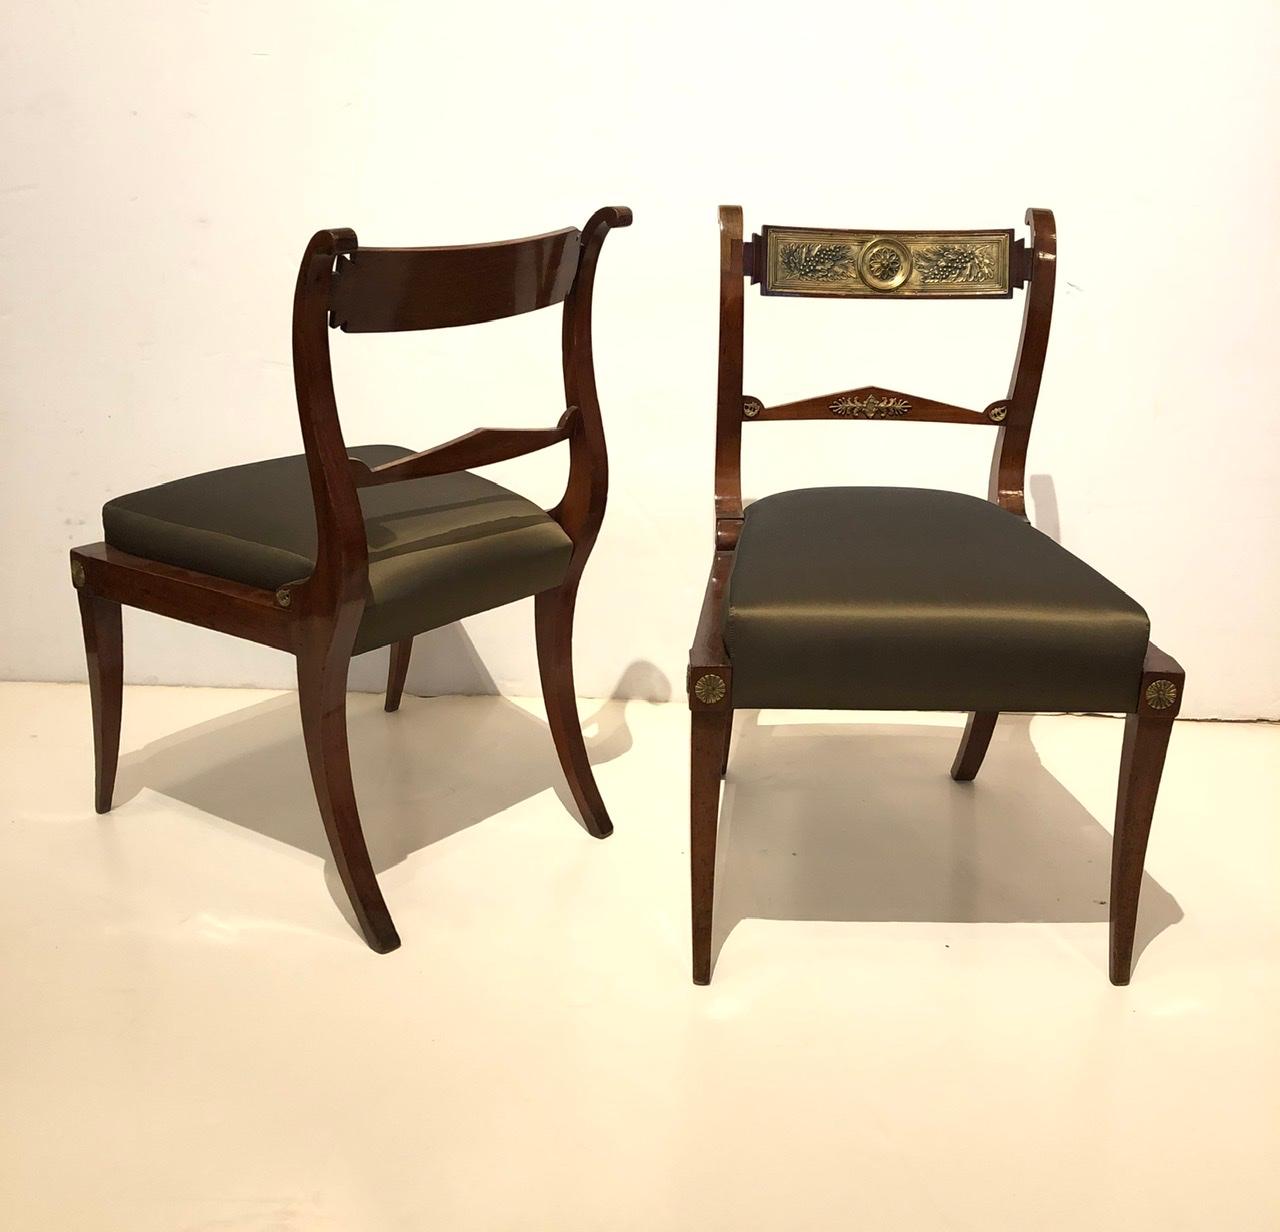 Polished Fine Pair of Neoclassical Side Chairs, 1st Half 19th Century For Sale